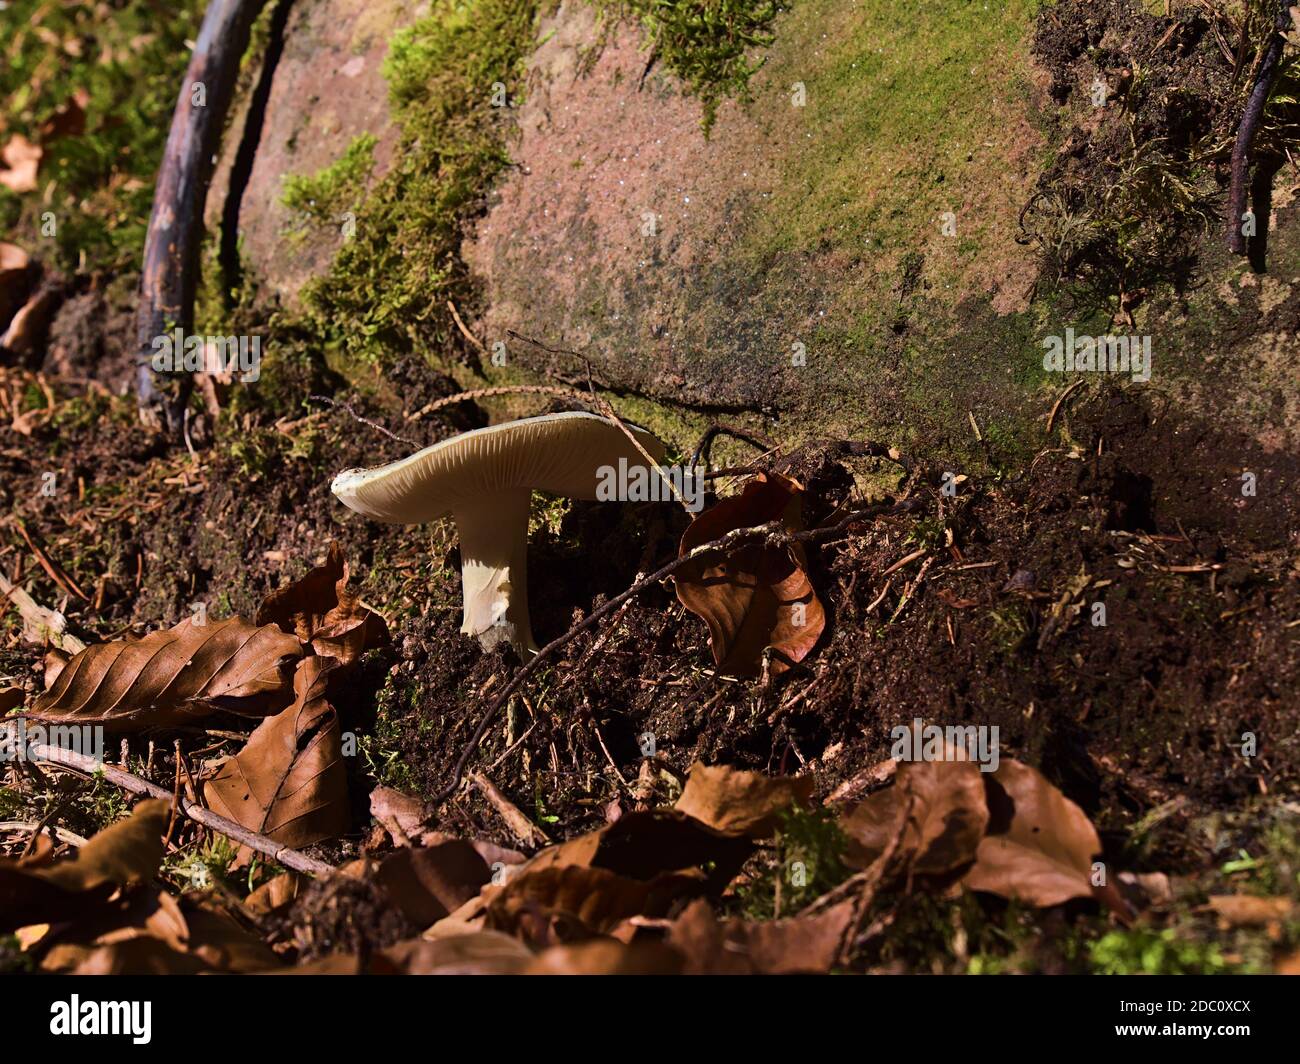 Closeup view of single mushroom growing at the side of a hiking path in Black Forest, Germany below a rock with foliage of brown colored leaves. Stock Photo